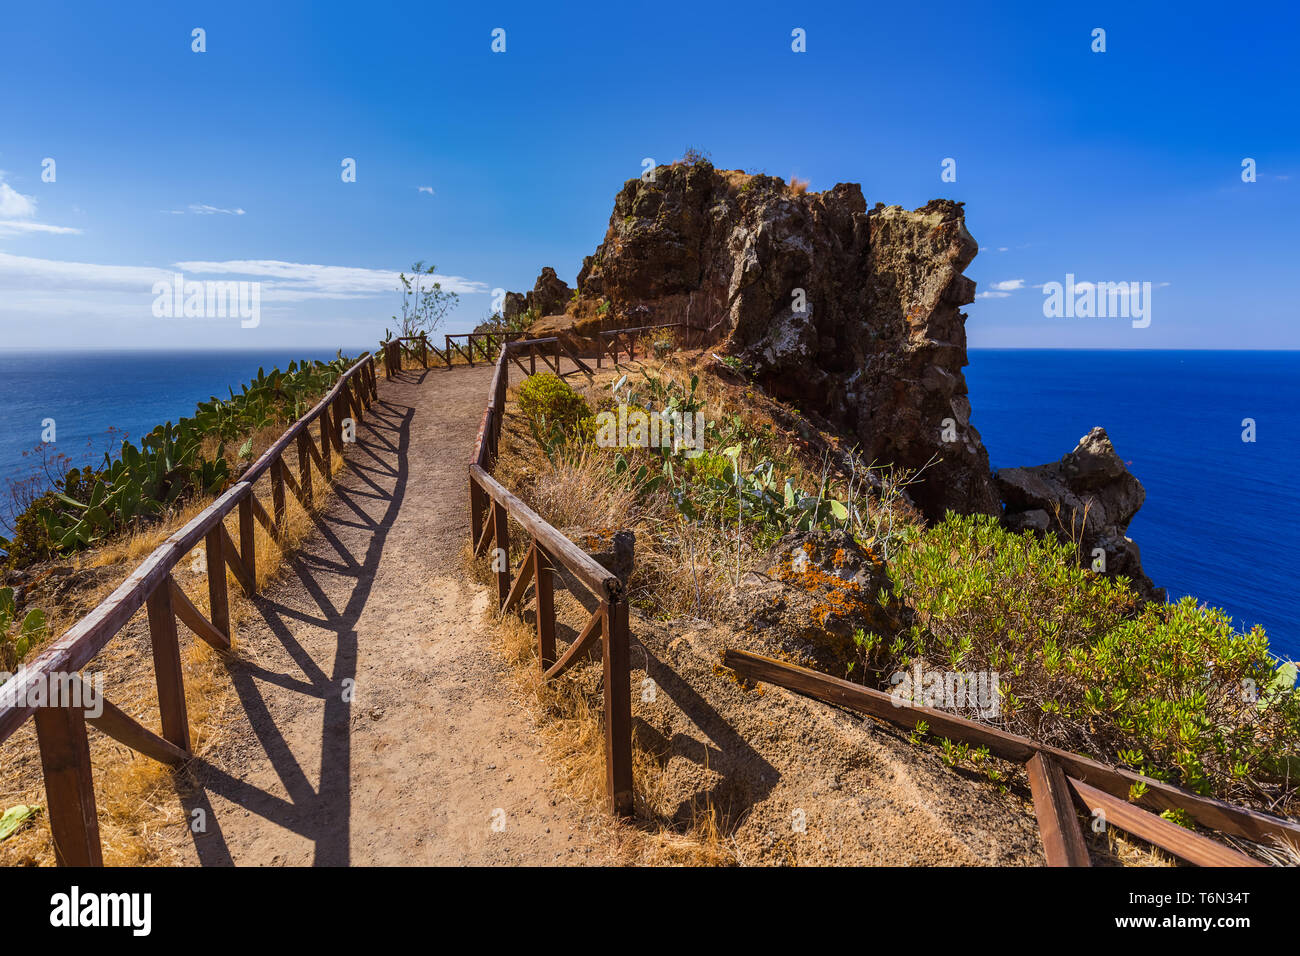 Viewpoint near The Christ statue on Madeira island - Portugal Stock Photo